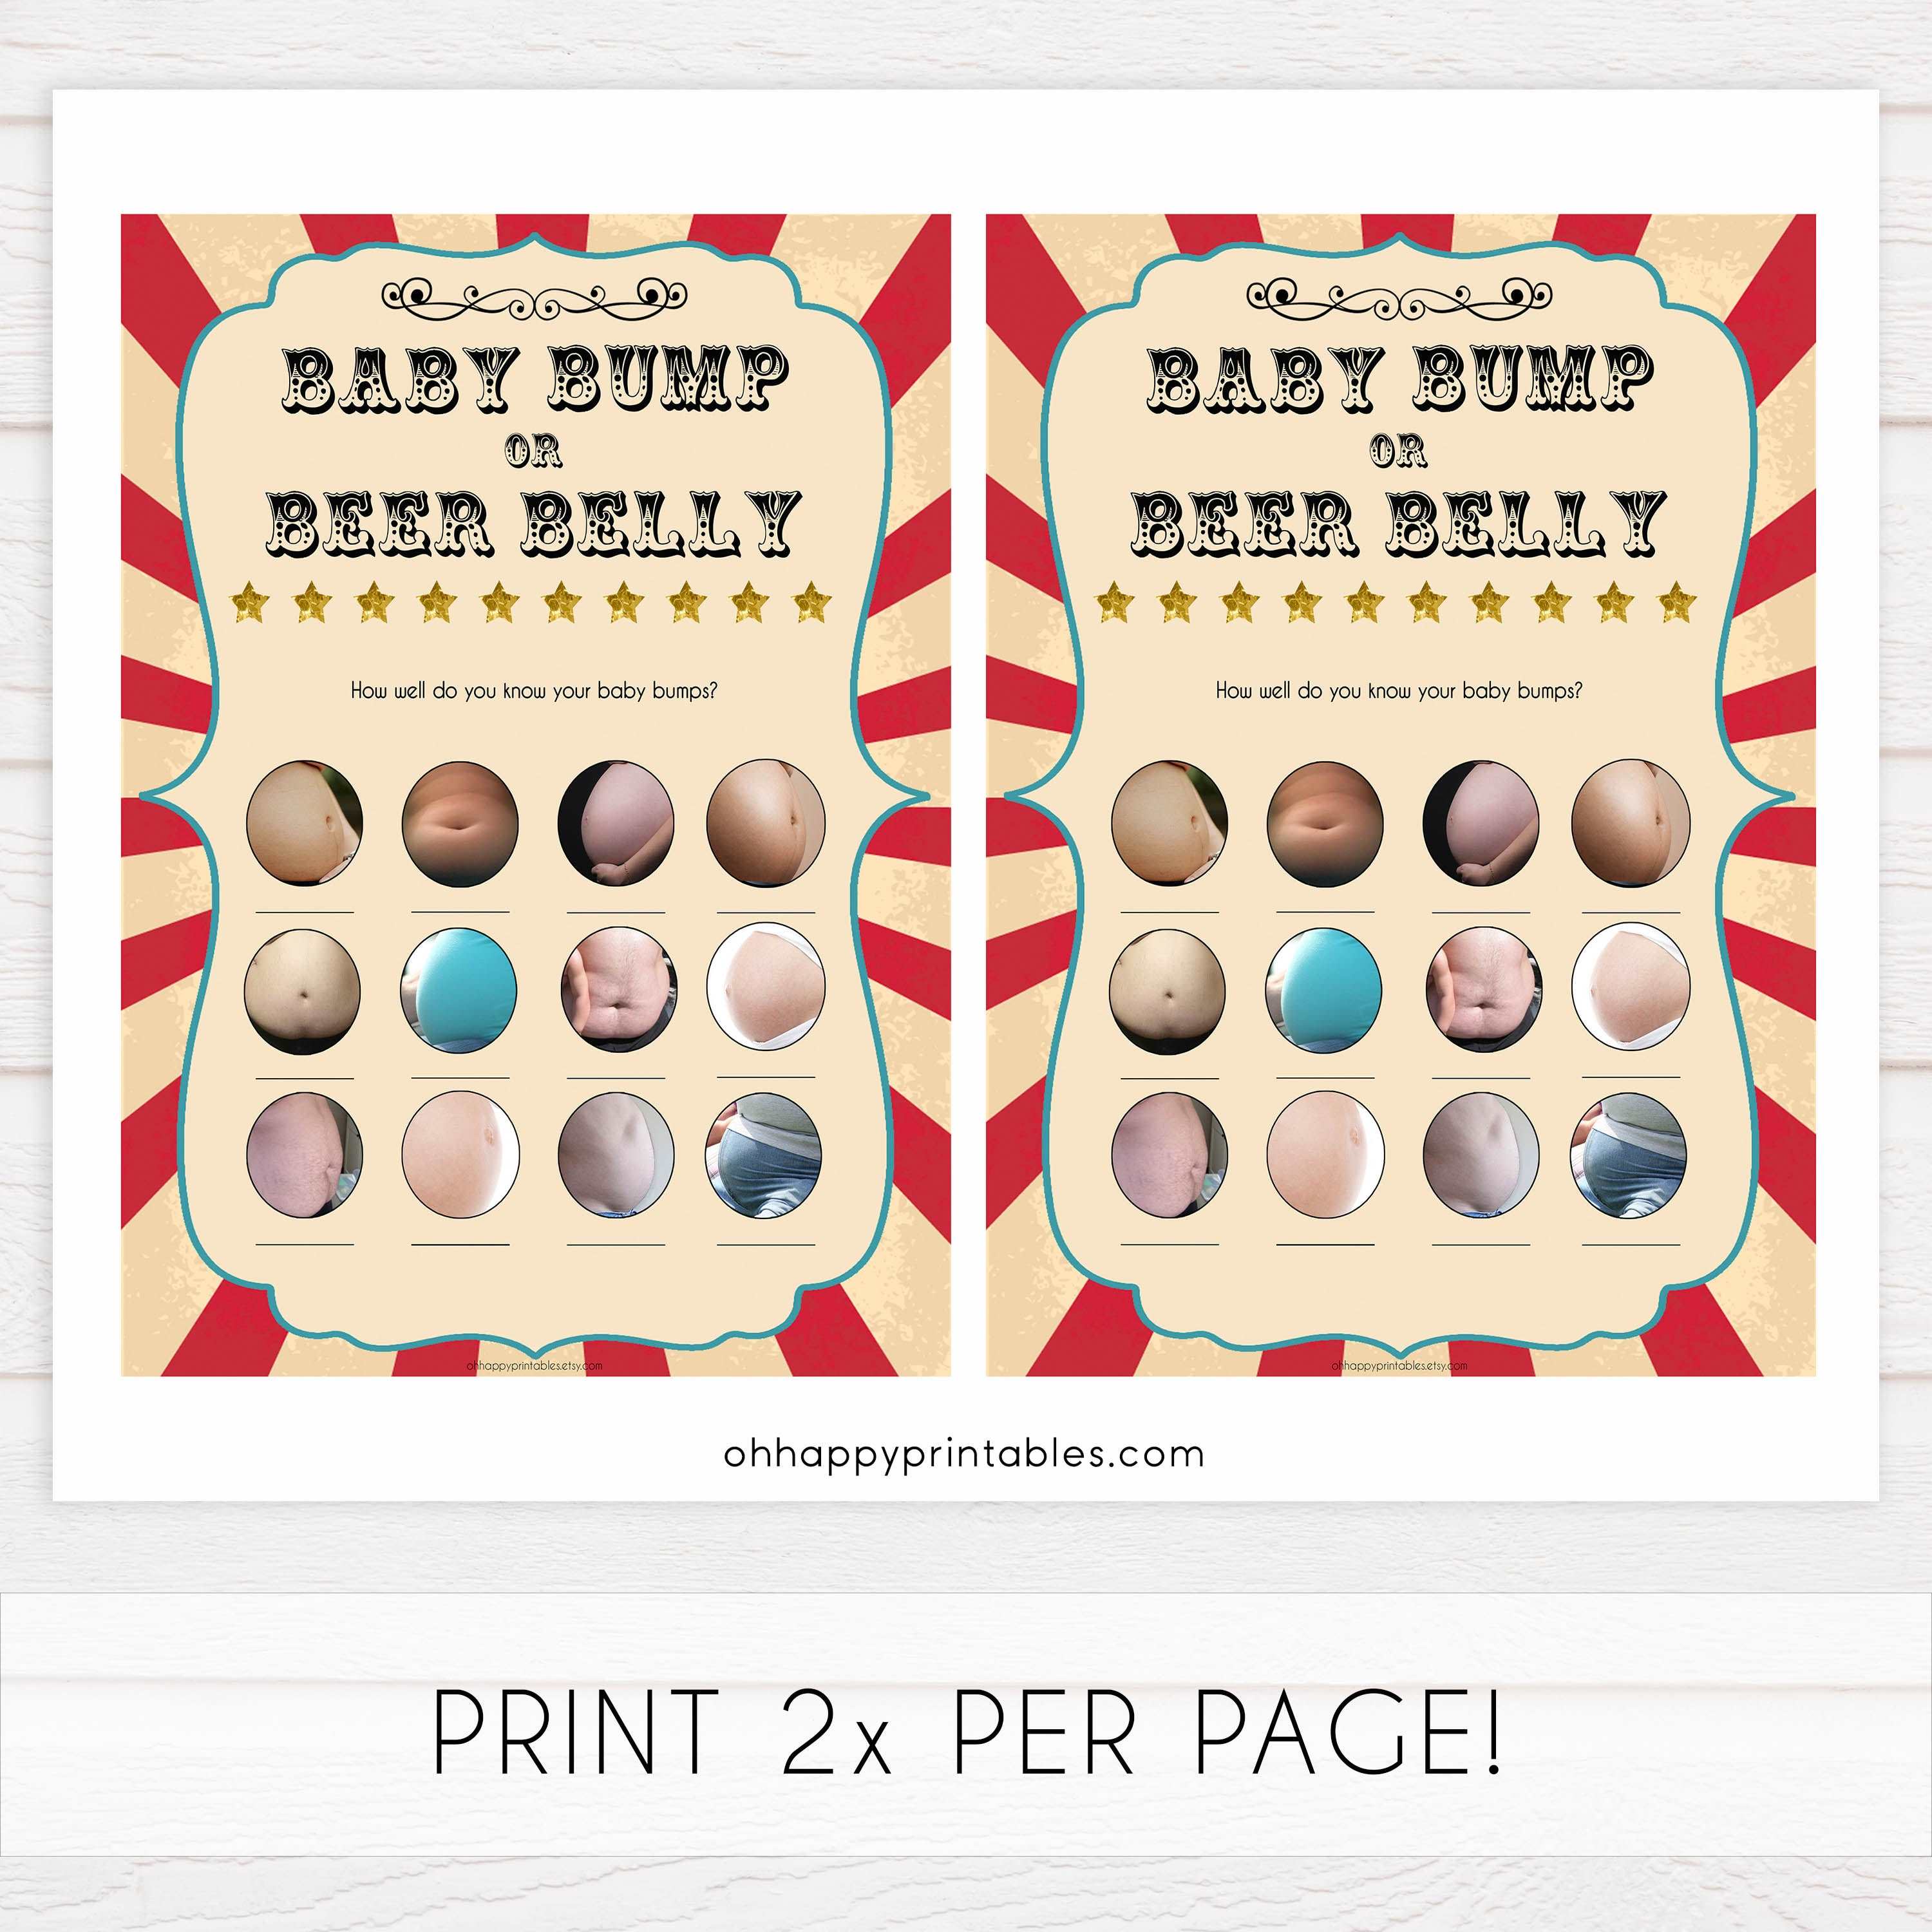 labor or porn, baby bump beer belly, boobs or butts baby games, Printable baby shower games, circus fun baby games, baby shower games, fun baby shower ideas, top baby shower ideas, carnival baby shower, circus baby shower ideas